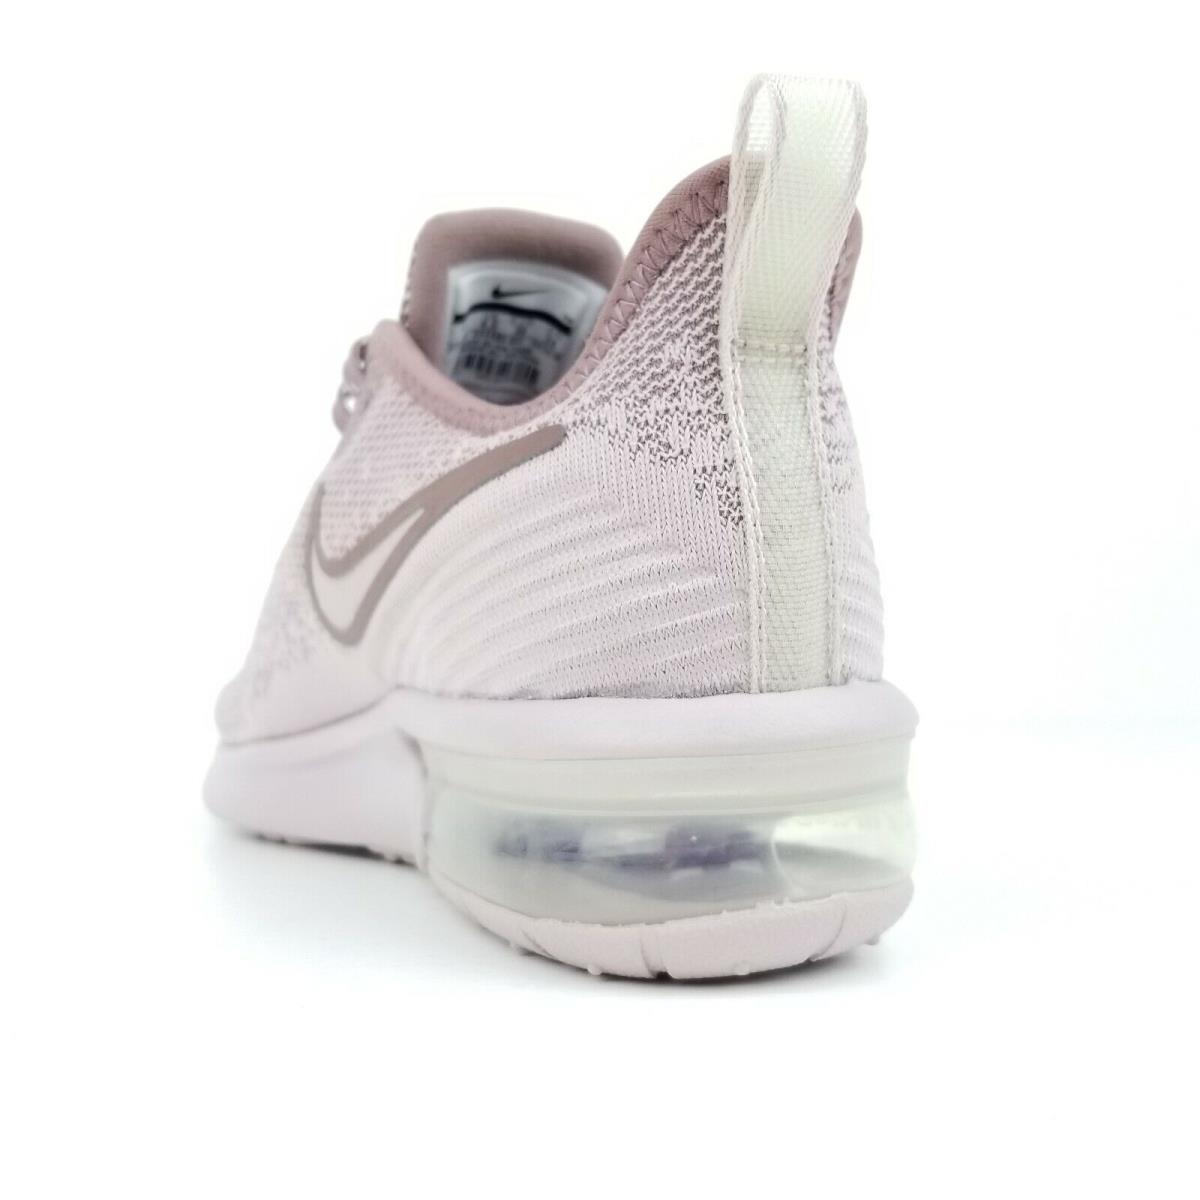 Sabor Legibilidad Tierra Nike Air Max Sequent 4 Women`s Running Shoes Pink Rose AO4486 600 Sizes  7-11 | 883212643070 - Nike shoes Air Max Sequent - Rose Pink | SporTipTop